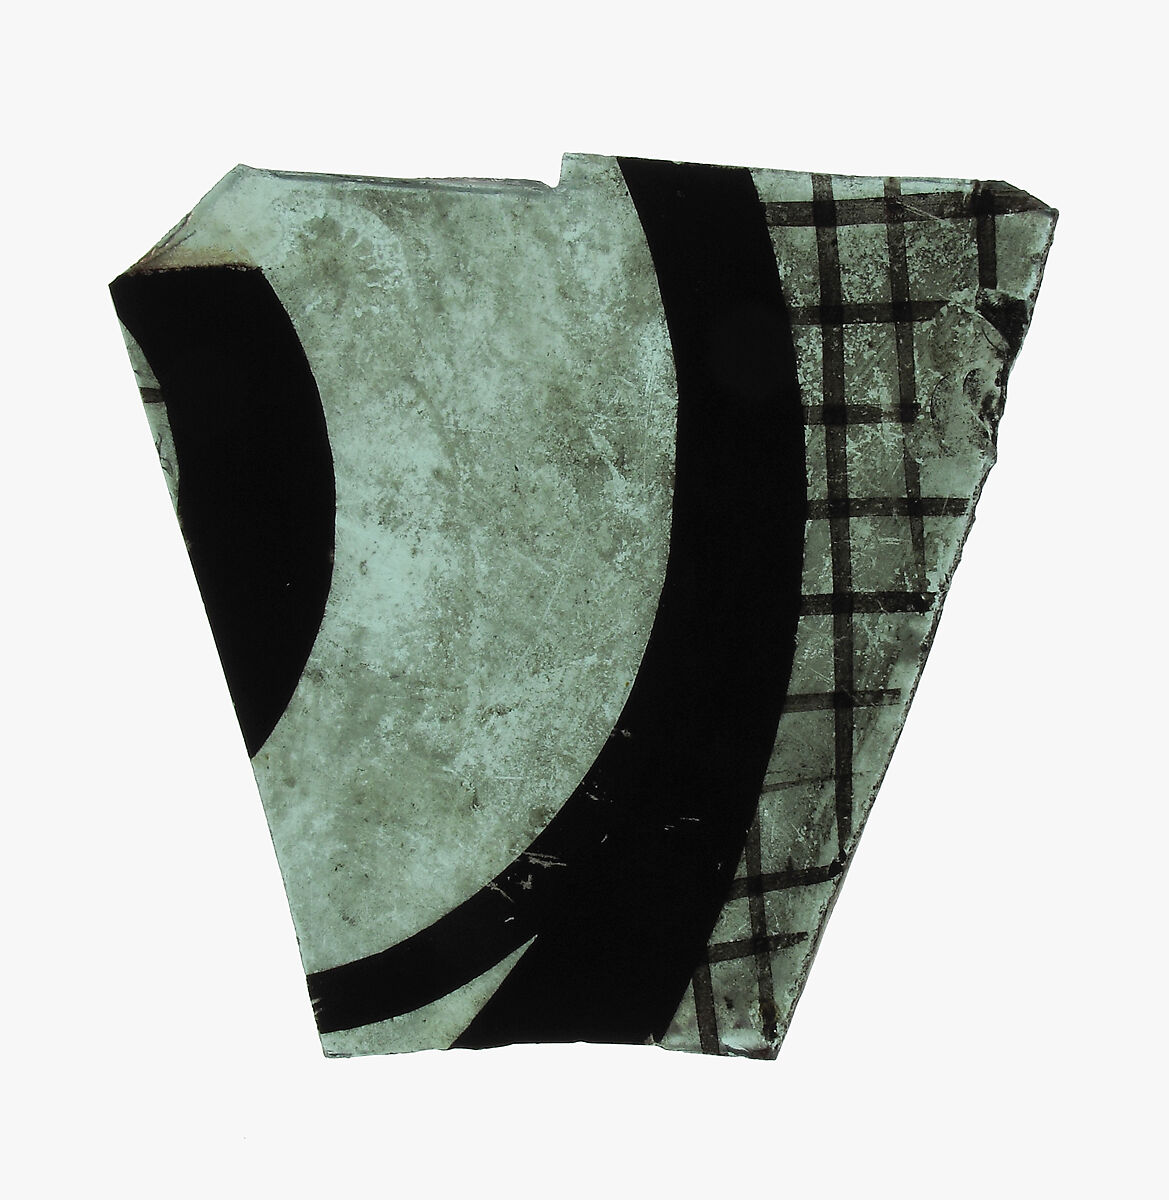 Glass Fragment, Colorless glass, French 